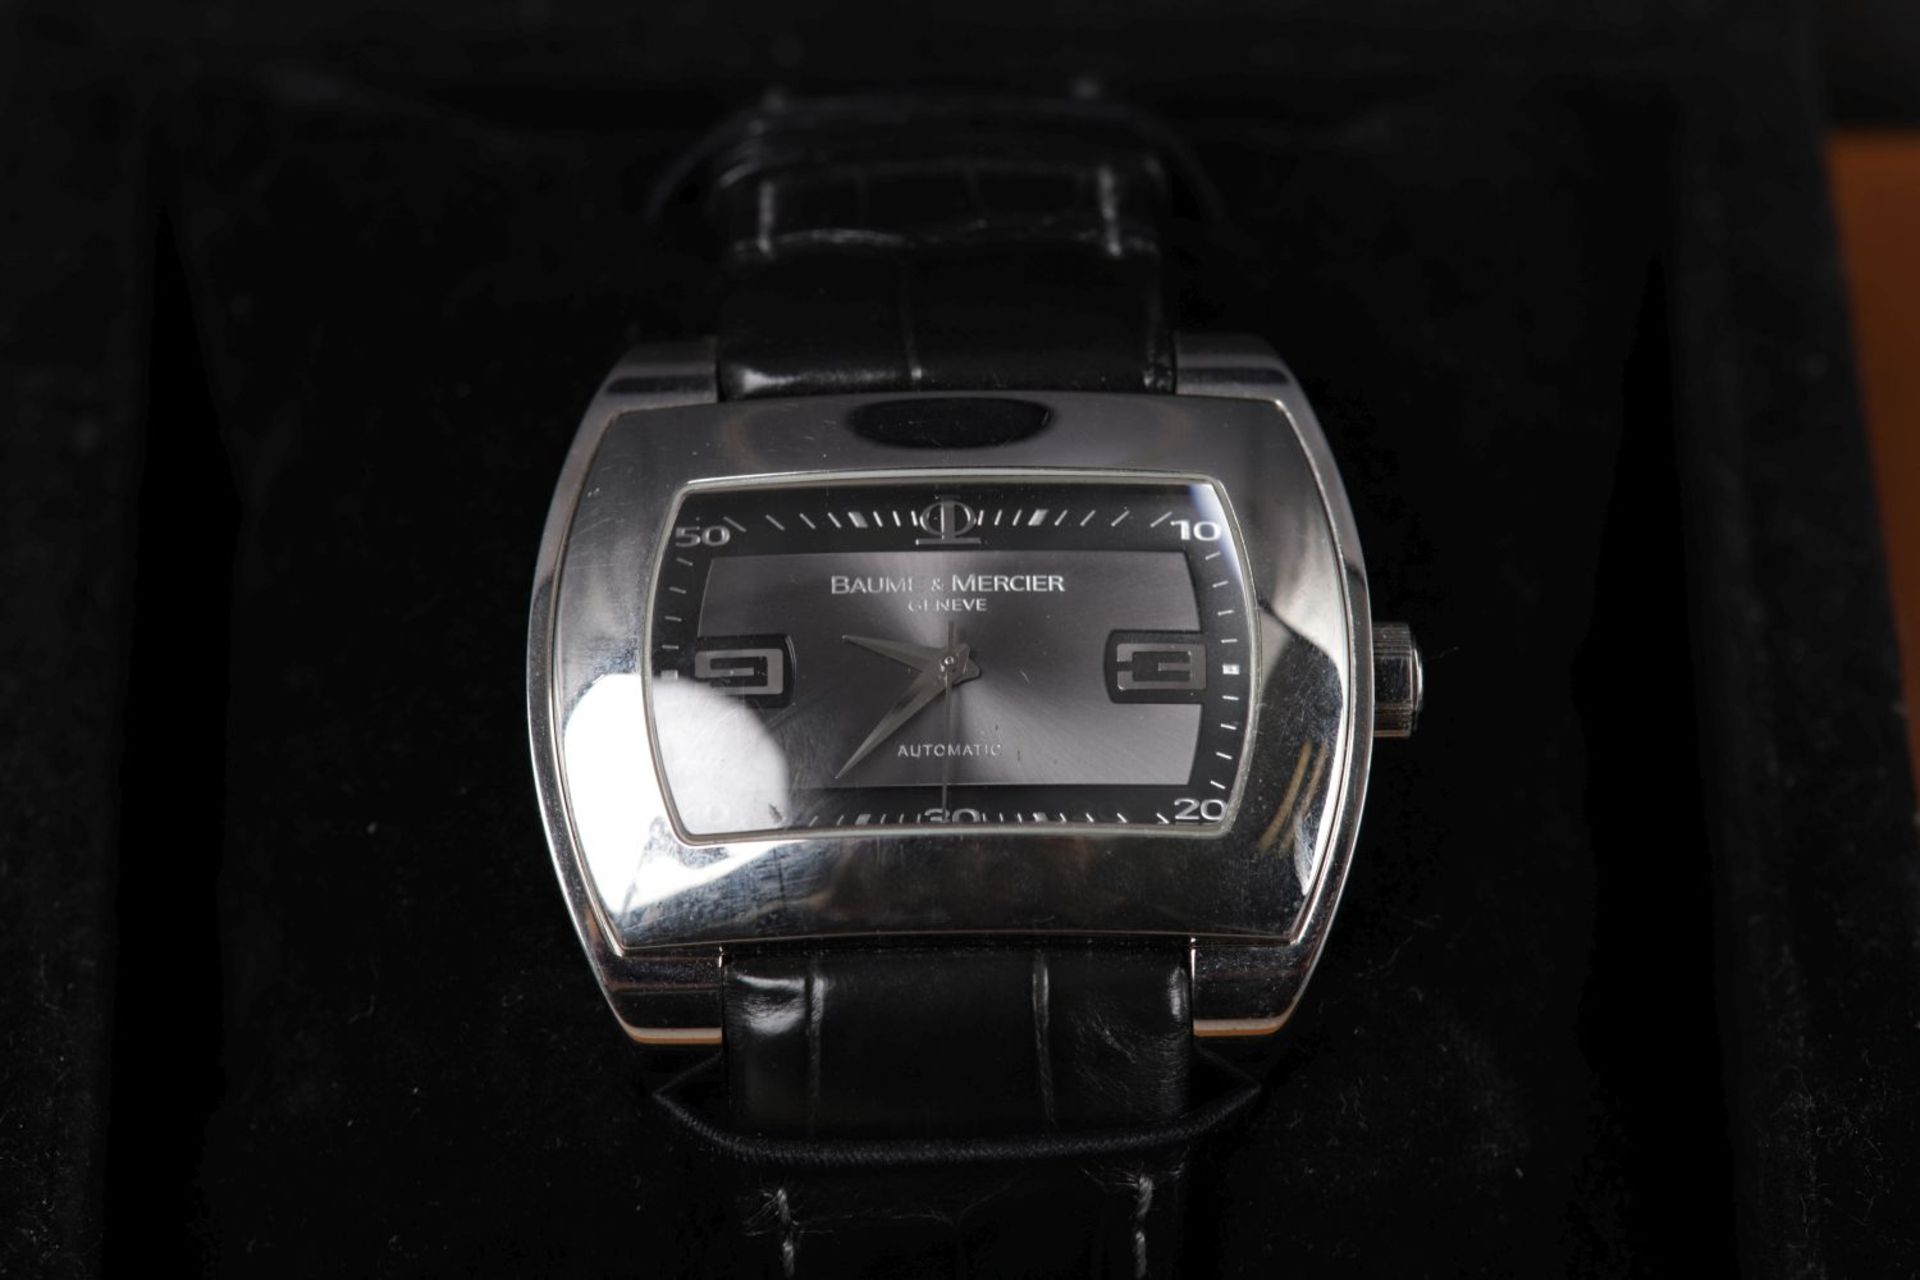 BAUME & MERCIER AUTOMATIC WATCH - Image 2 of 2